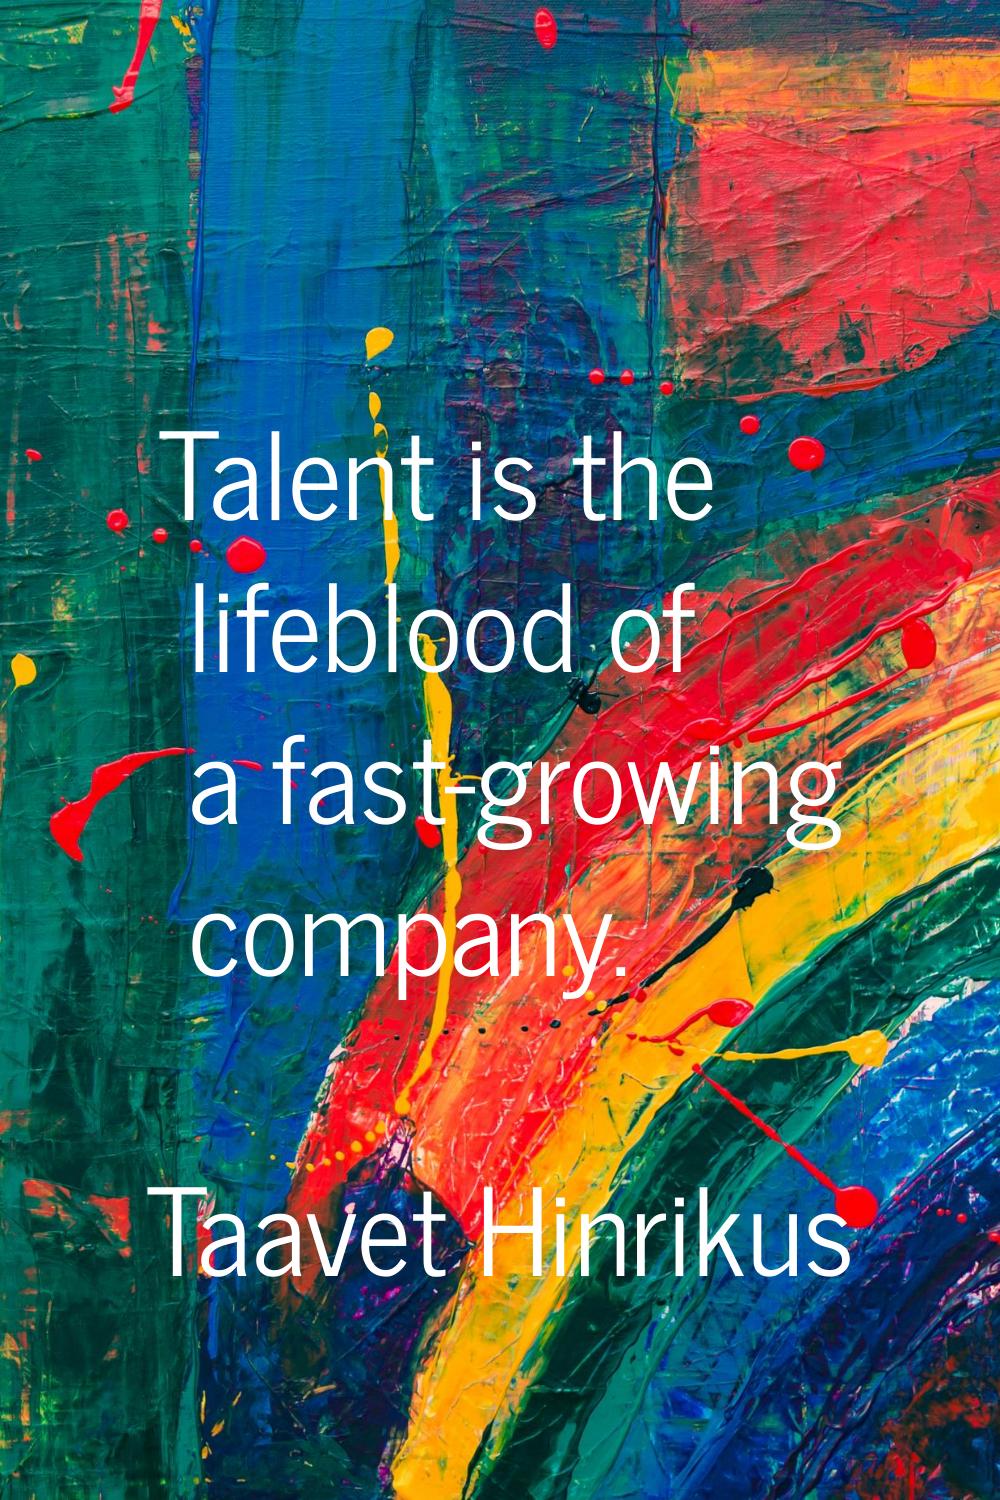 Talent is the lifeblood of a fast-growing company.